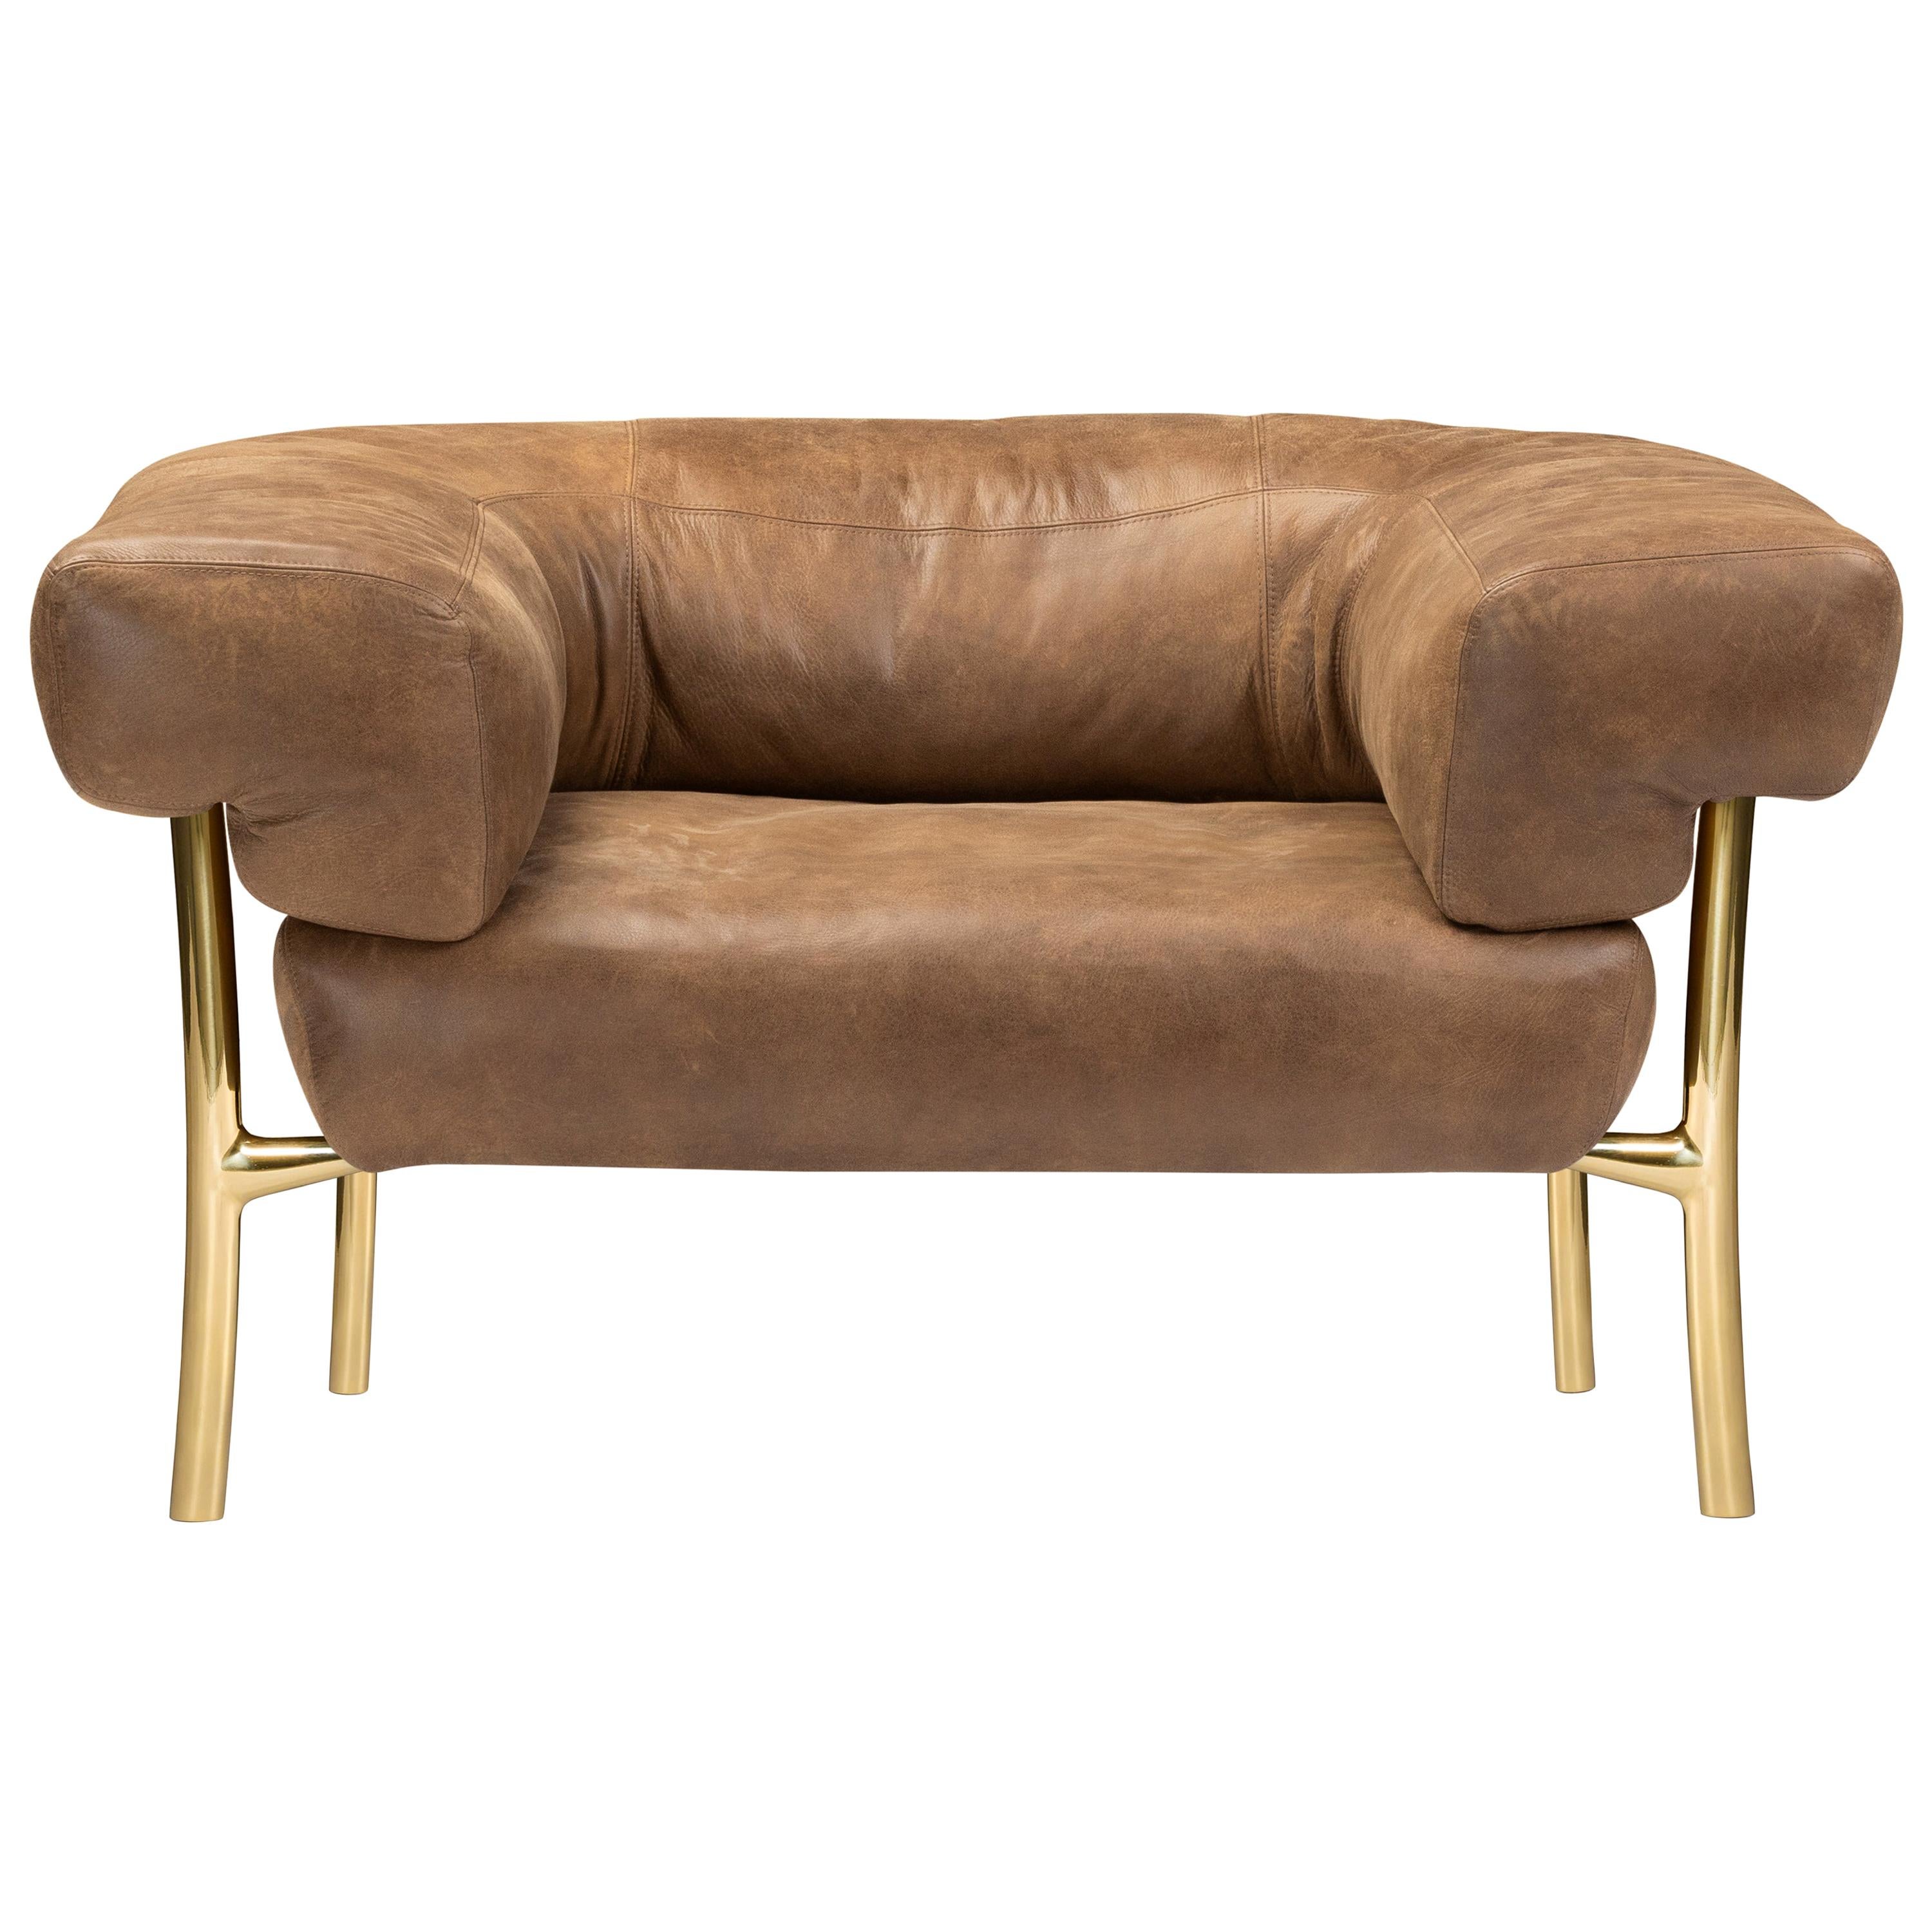 Katana Lounge Chair in Choclate Forest Leather with Polished Brass Legs